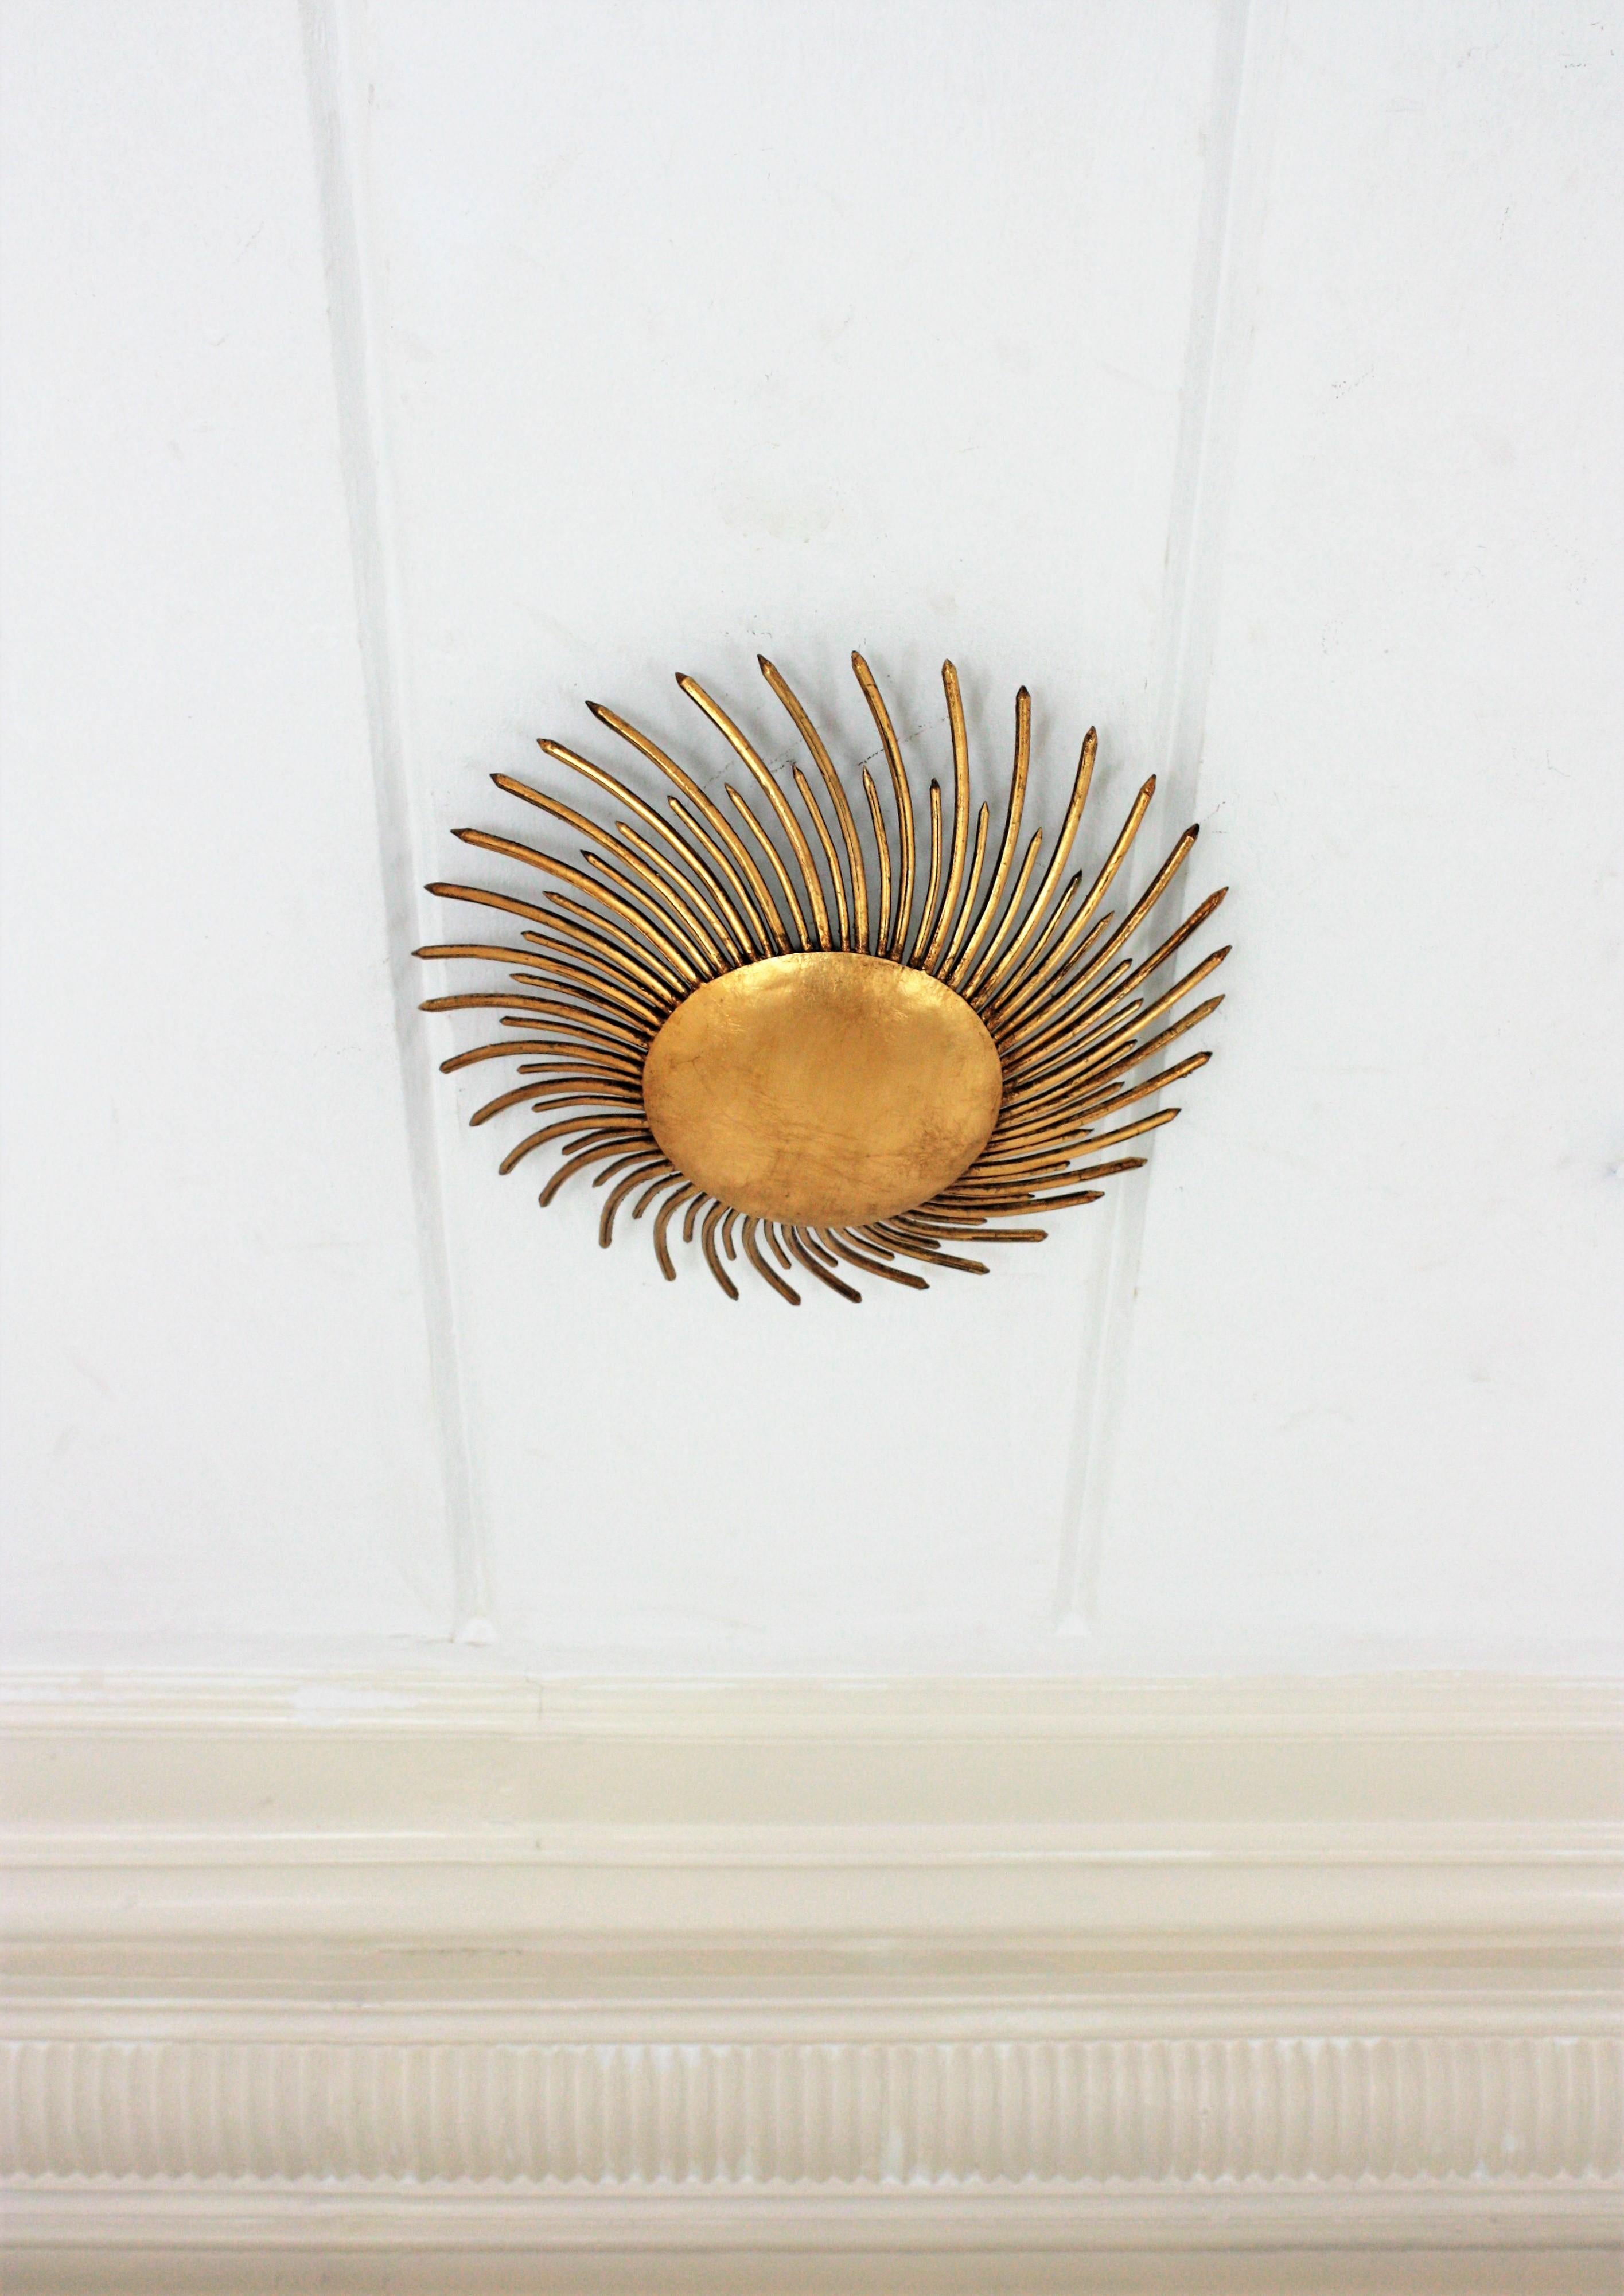 Art Deco French Sunburst Light Fixture in Gilt Iron with Twisted Nails